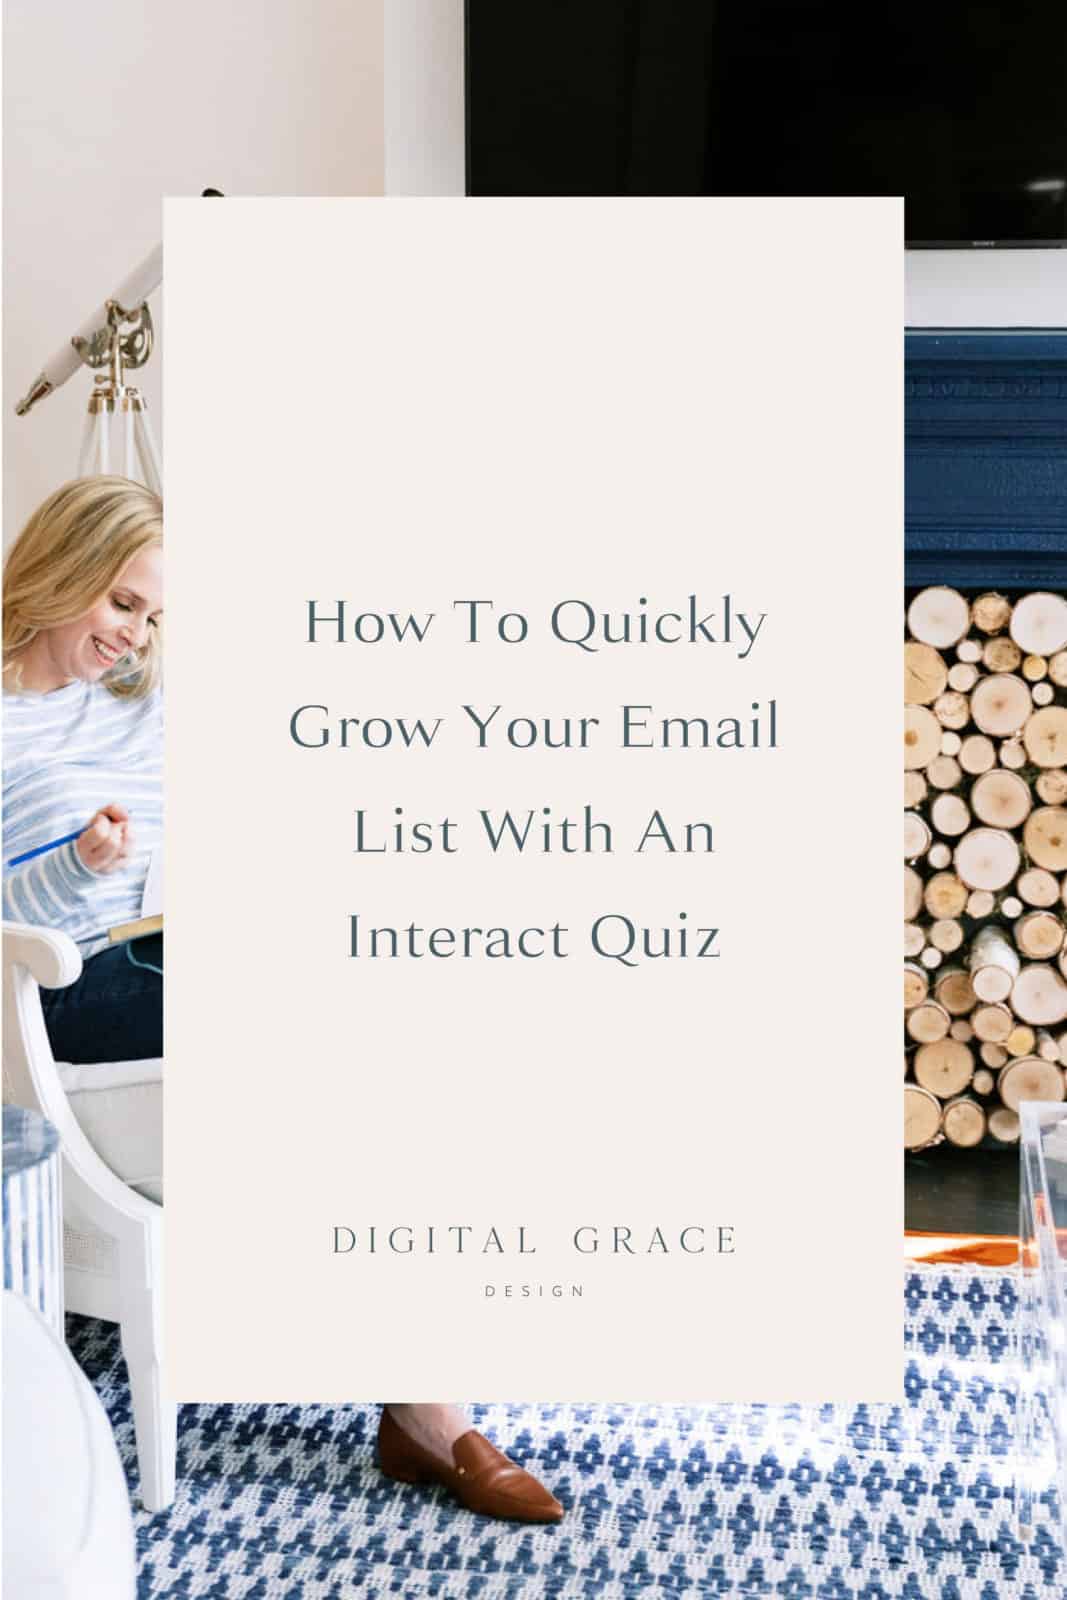 How to Quickly Grow Your Email List With An Interactive Quiz